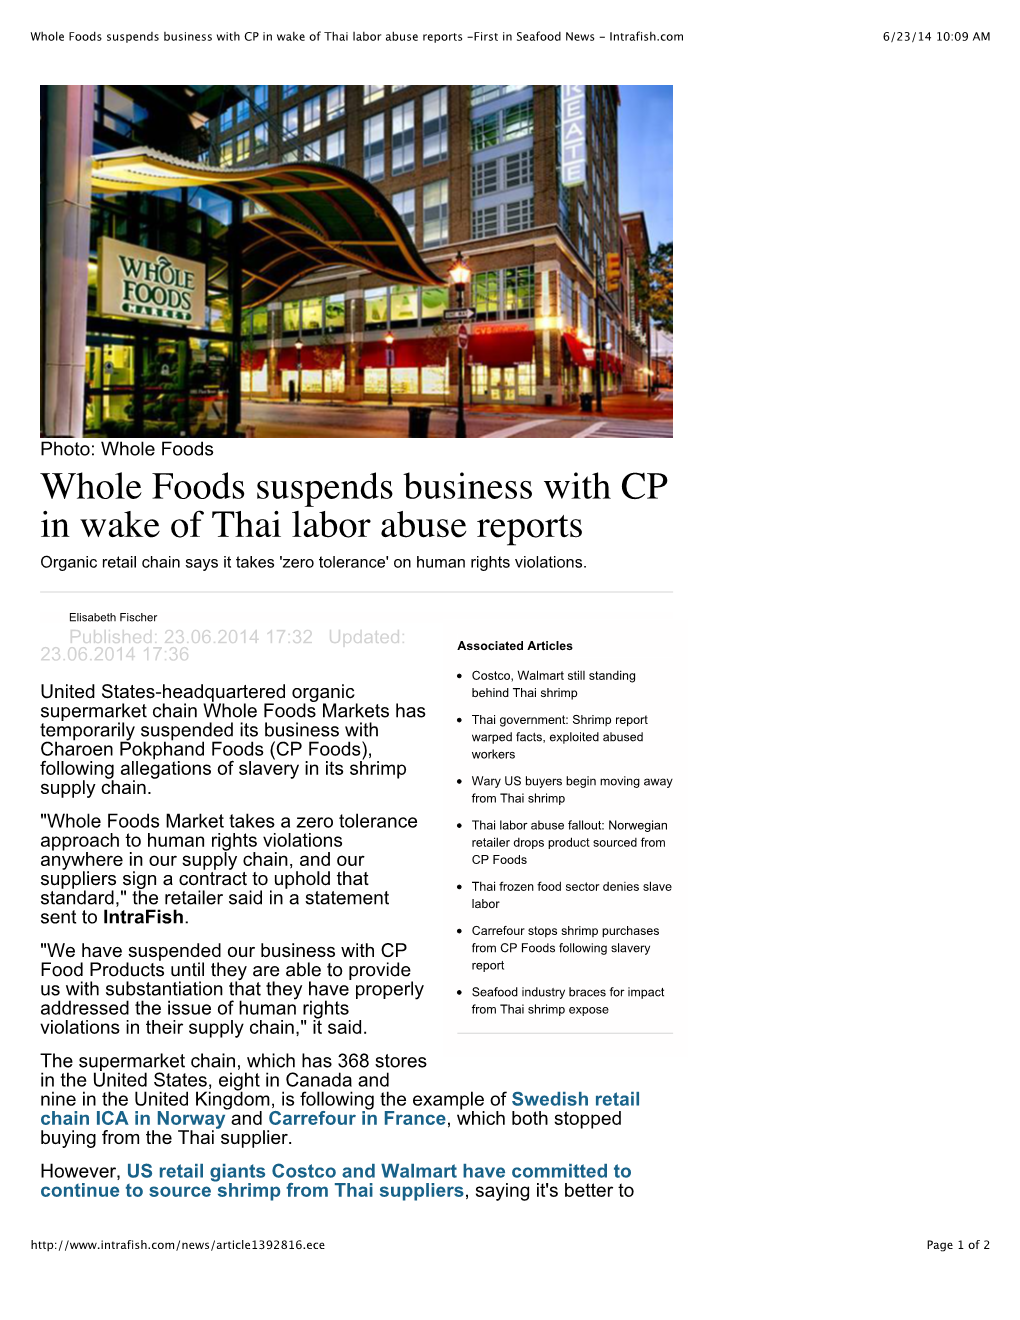 Whole Foods Suspends Business with CP in Wake of Thai Labor Abuse Reports -First in Seafood News - Intrafish.Com 6/23/14 10:09 AM